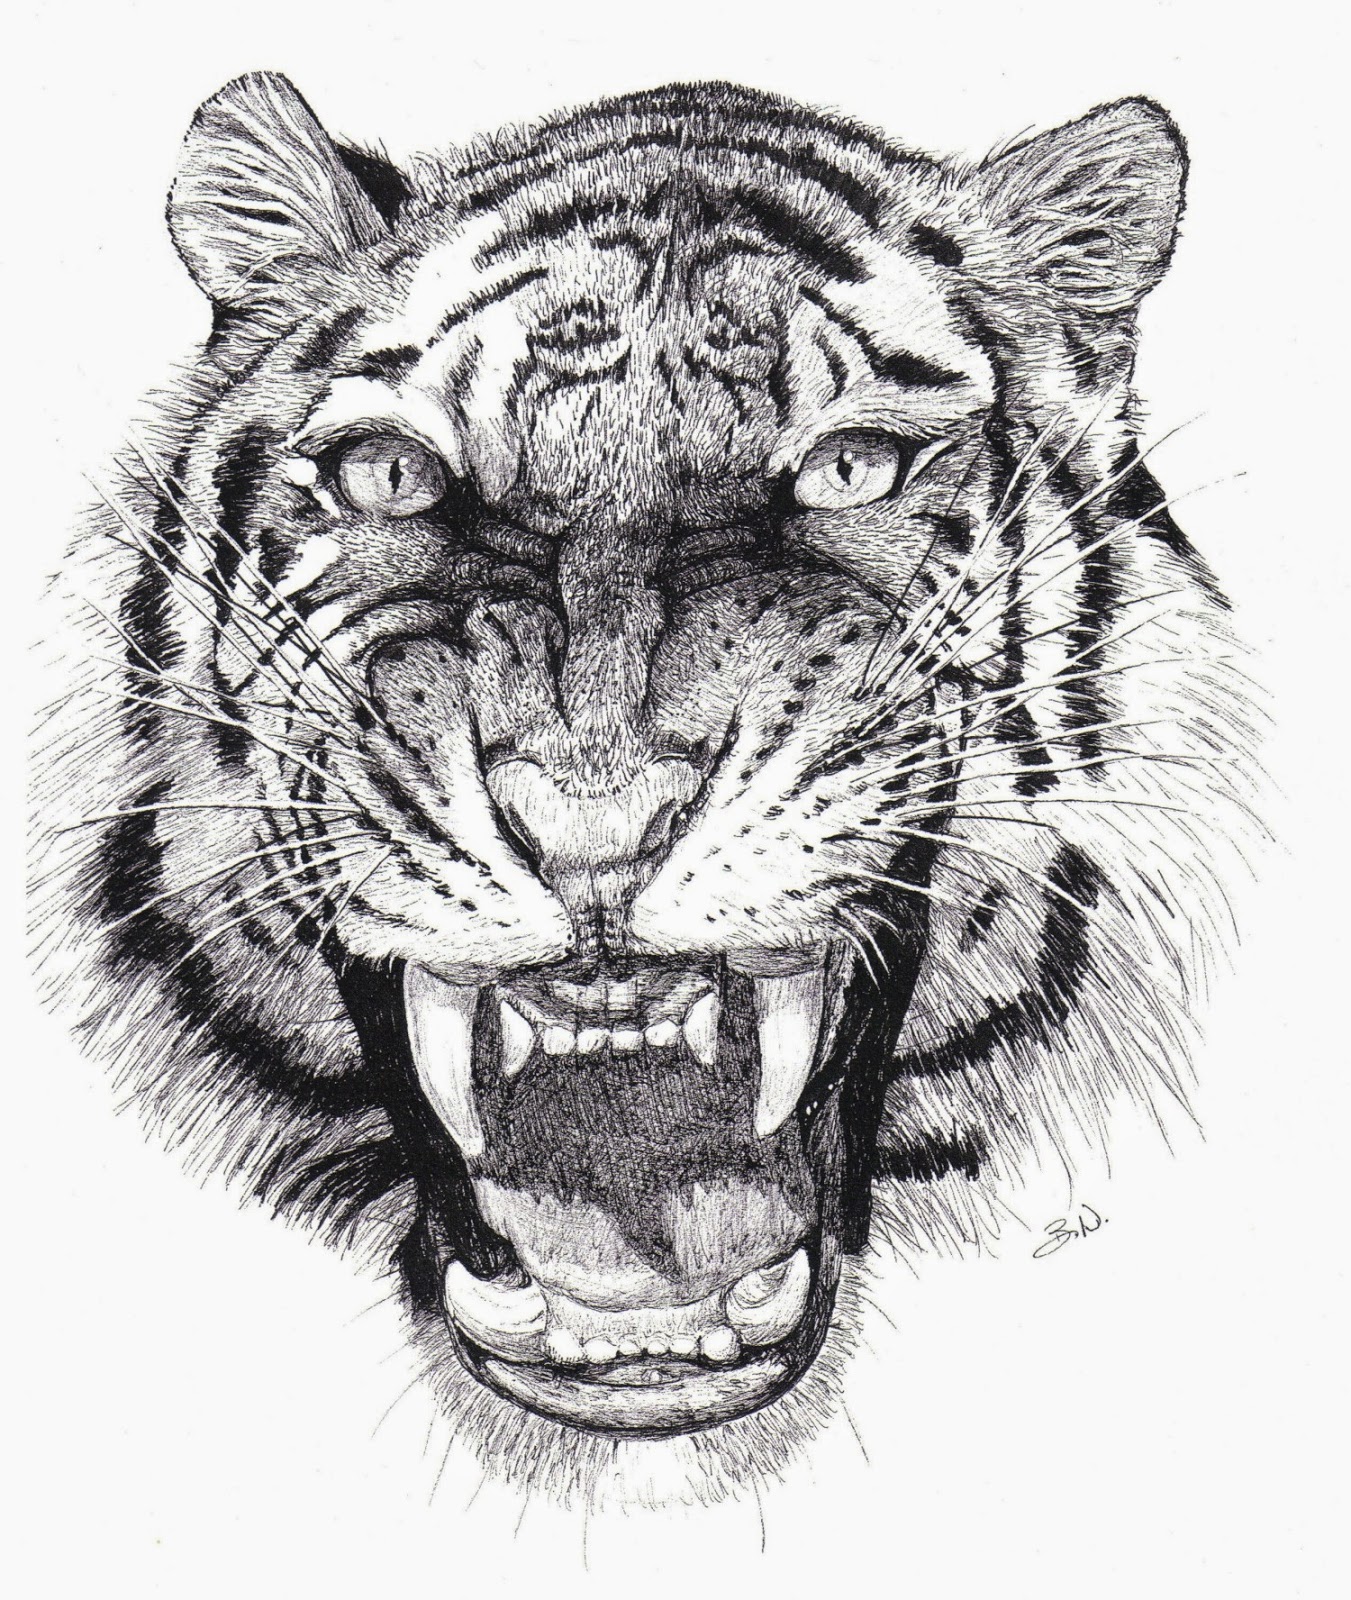 The Animal Cabin: Drawings of Tigers